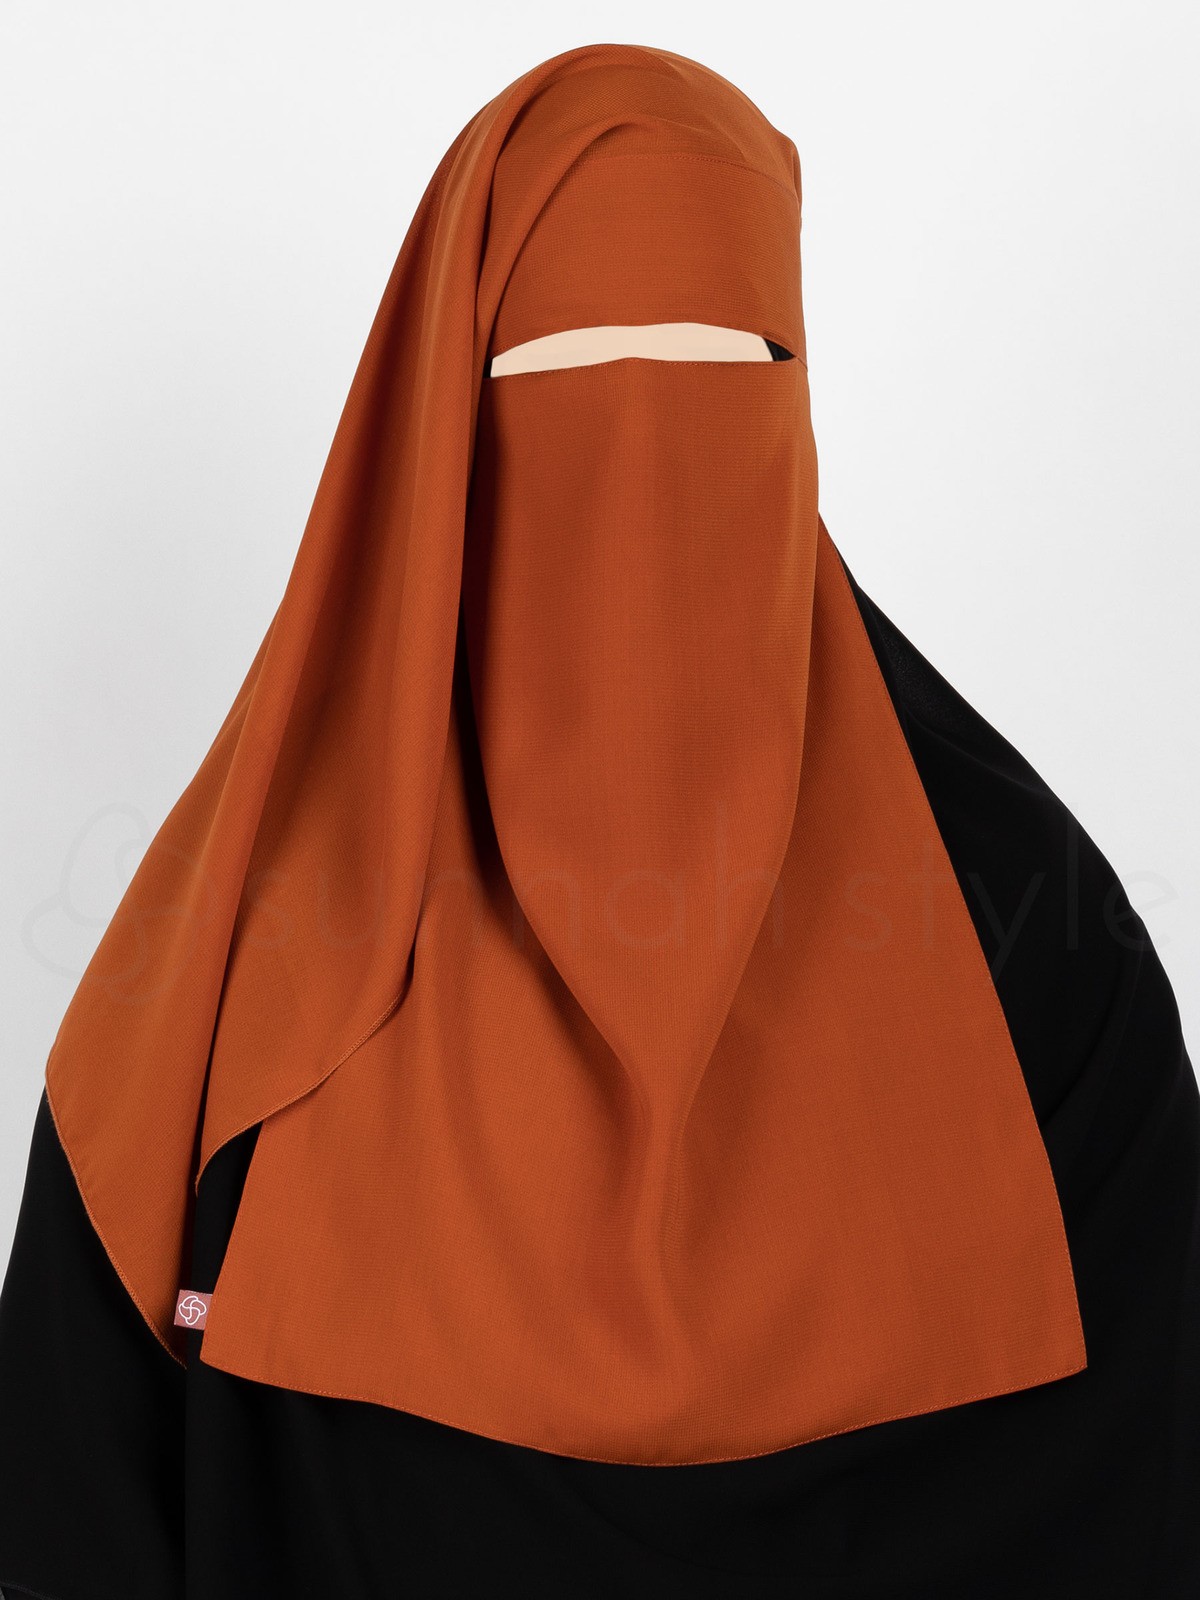 Sunnah Style - Two Layer Niqab (Autumn)